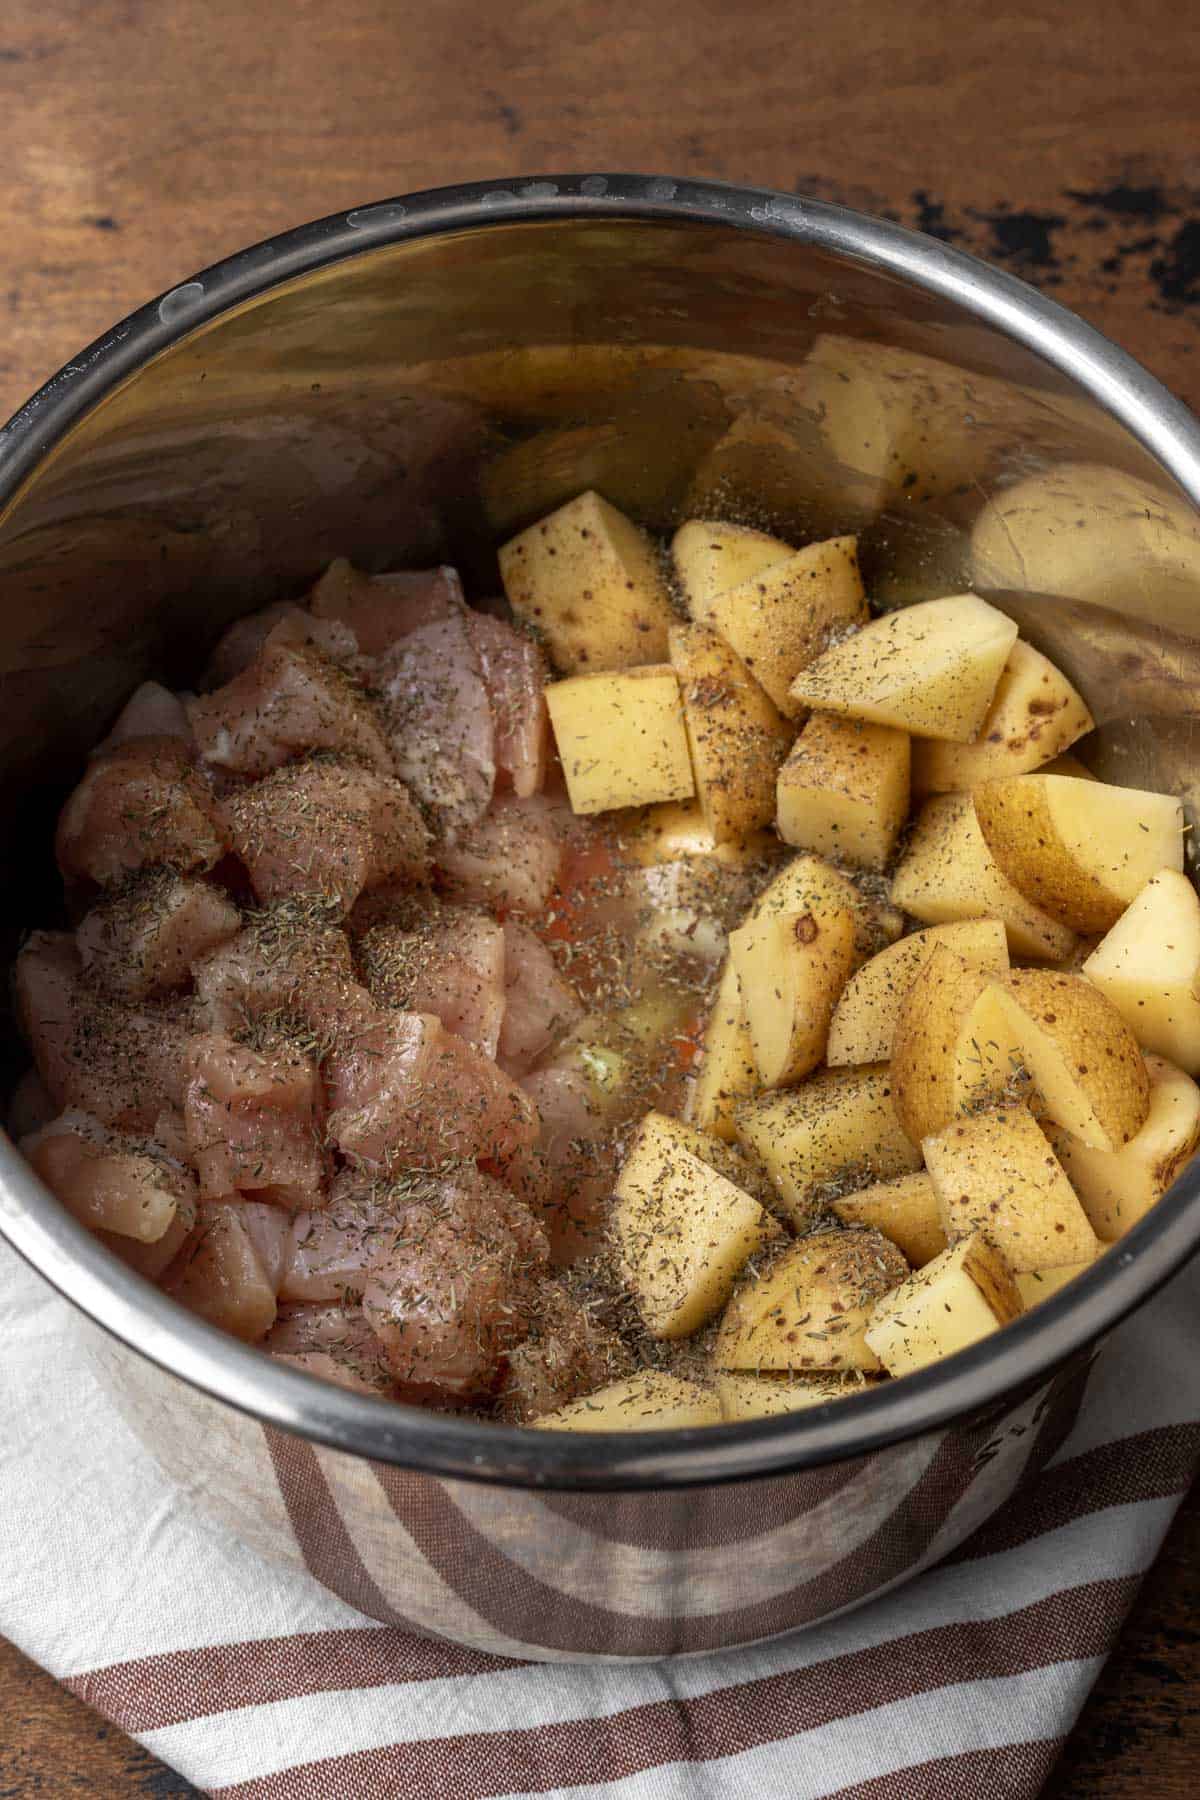 Cubed chicken, potatoes, broth, and seasoning added to the instant pot.